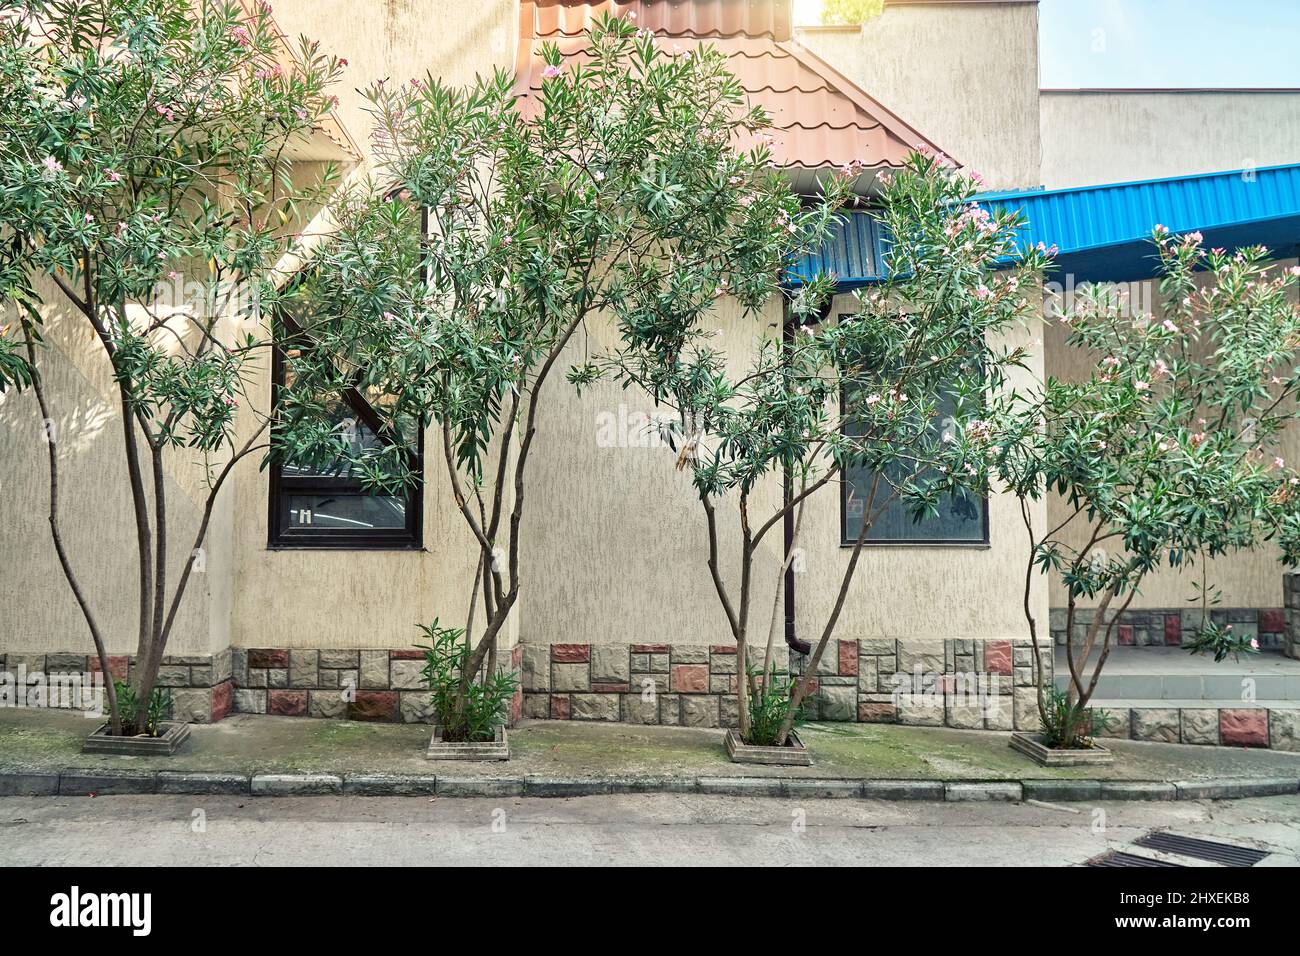 Young blooming oleander trees grow near building on city street. Old town and native flora decor. Urban lifestyle and tropical plants cultivation Stock Photo